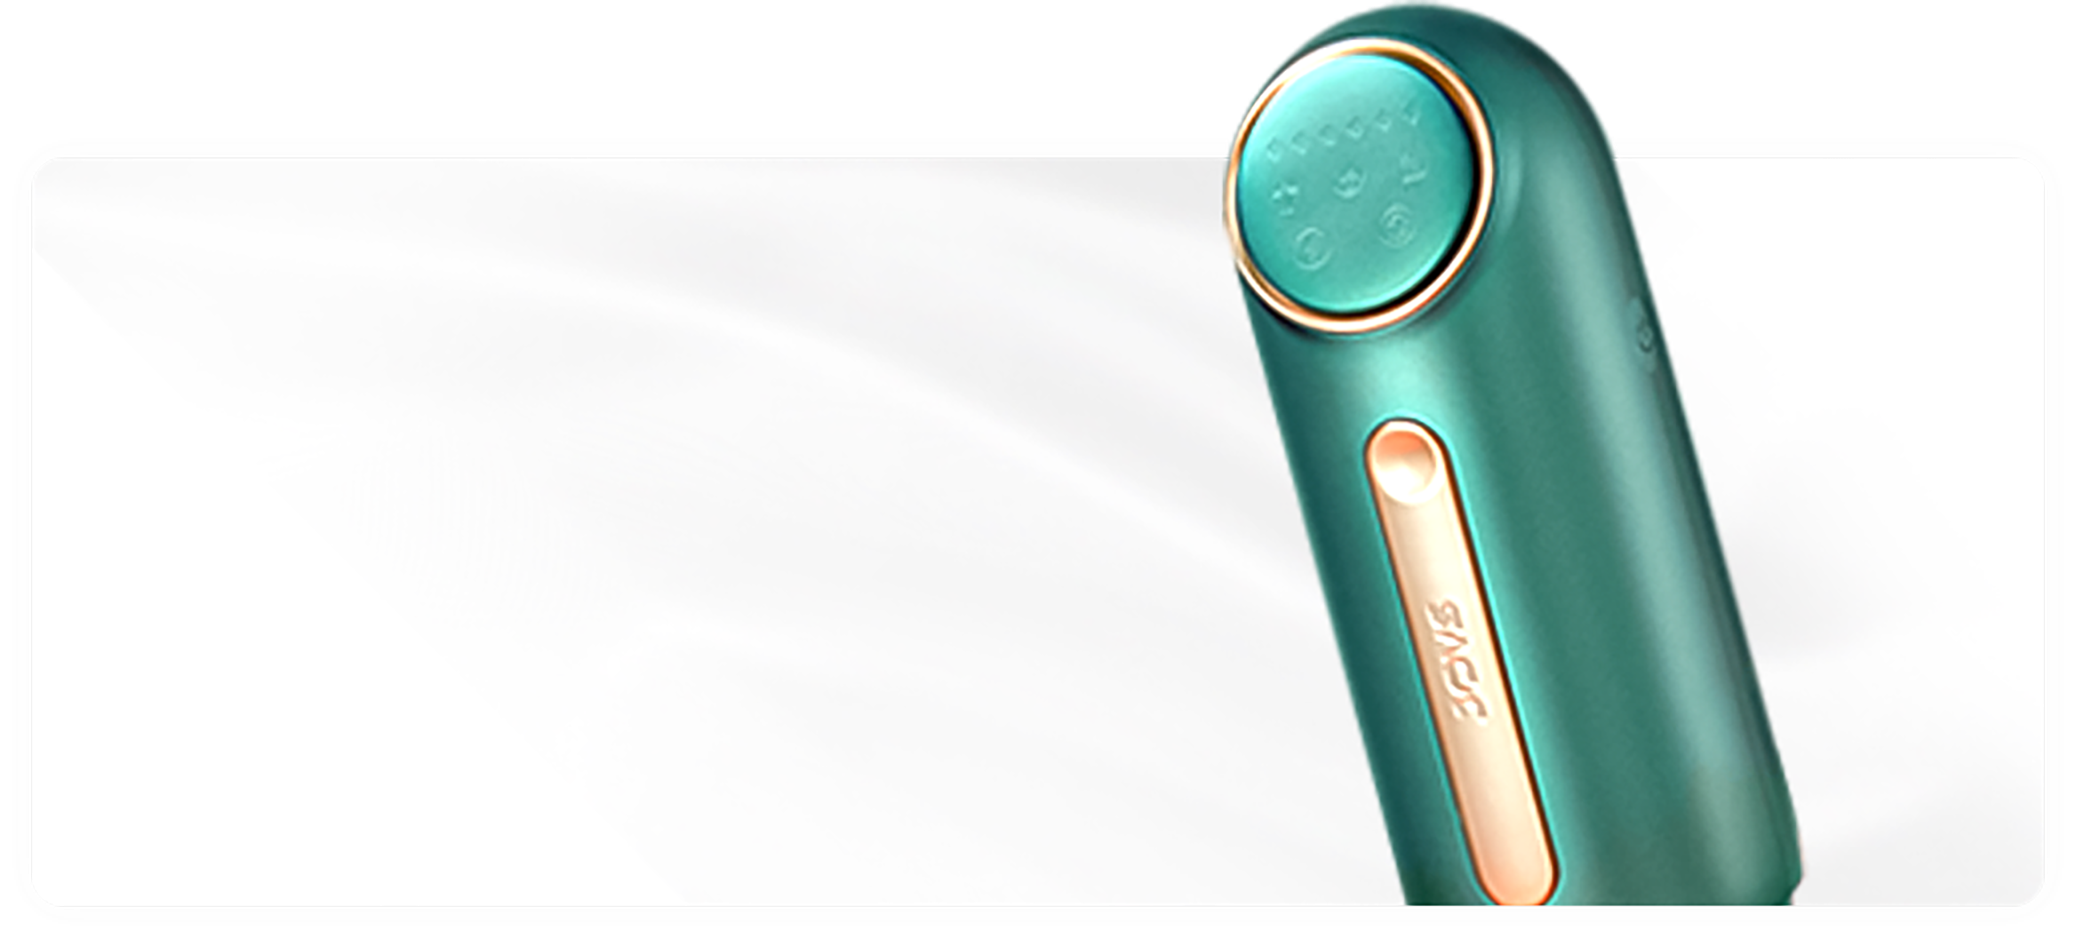 JOVS Mini Wireless Hair Removal Device in a sleek teal hue with gold trim, ergonomic shape, and intuitive touch interface for ease of use